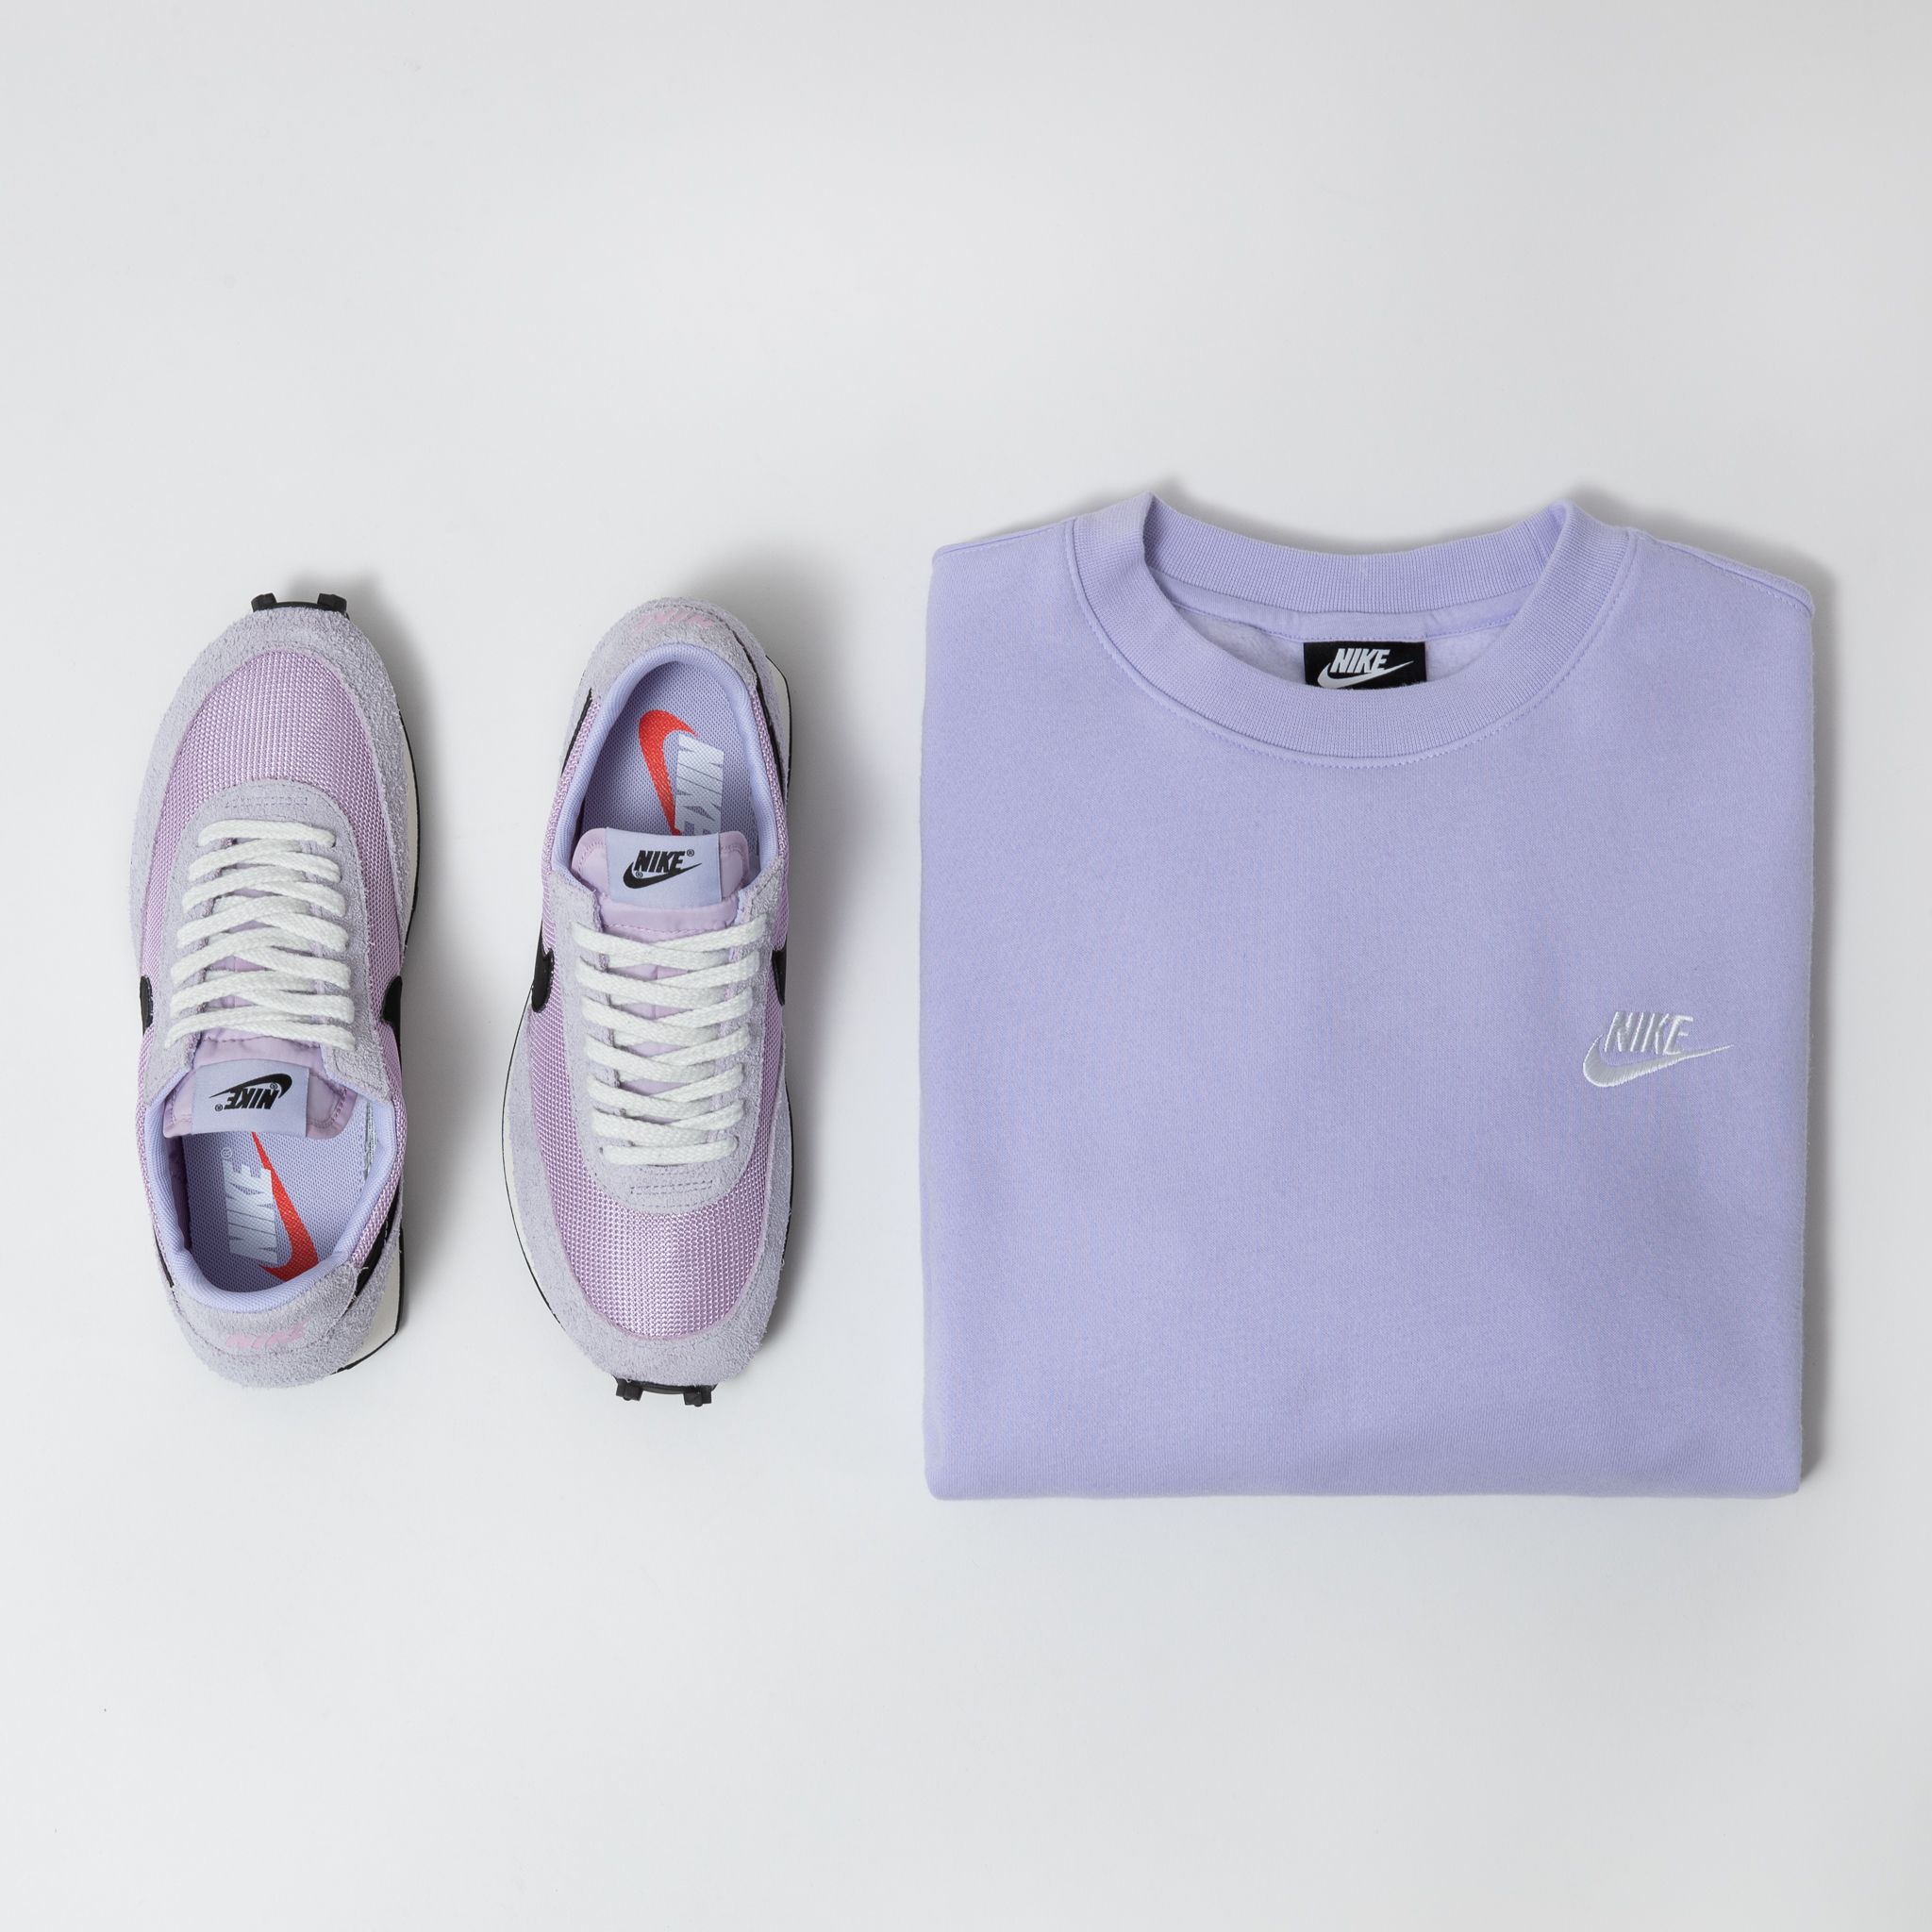 Titolo on Twitter: "livin purple 💜 Nike Club Crewneck and Daybreak available online ➡️ small x-large. style code 🔎 BV2662-539 US 4 (36) - US 13 (47.5) style code 🔎